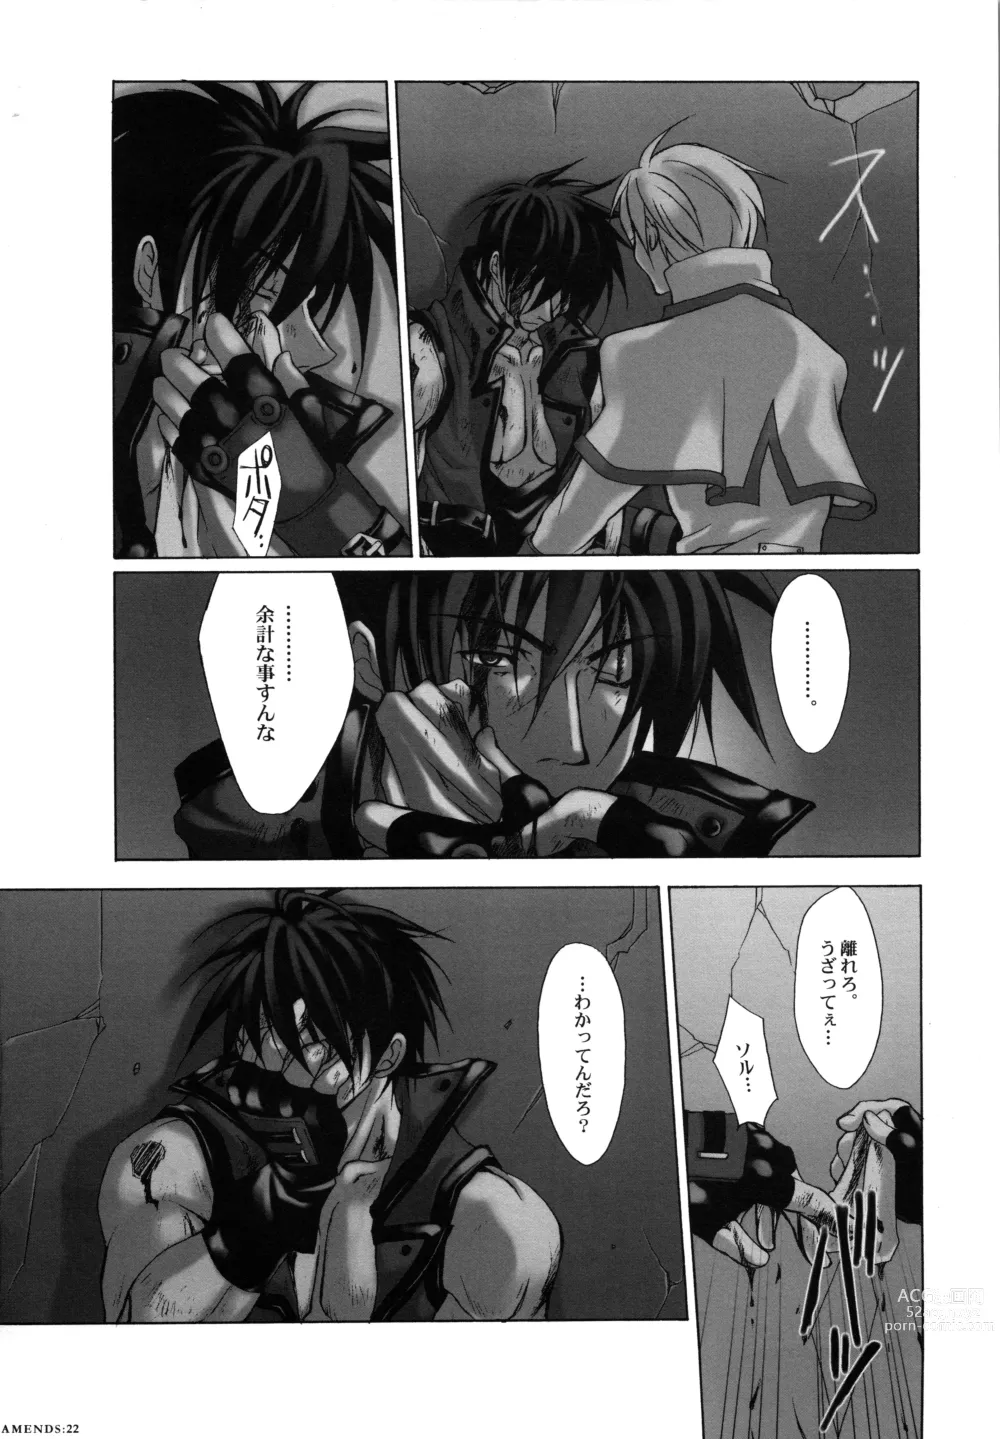 Page 22 of doujinshi AMENDS - make amends for ones sin.